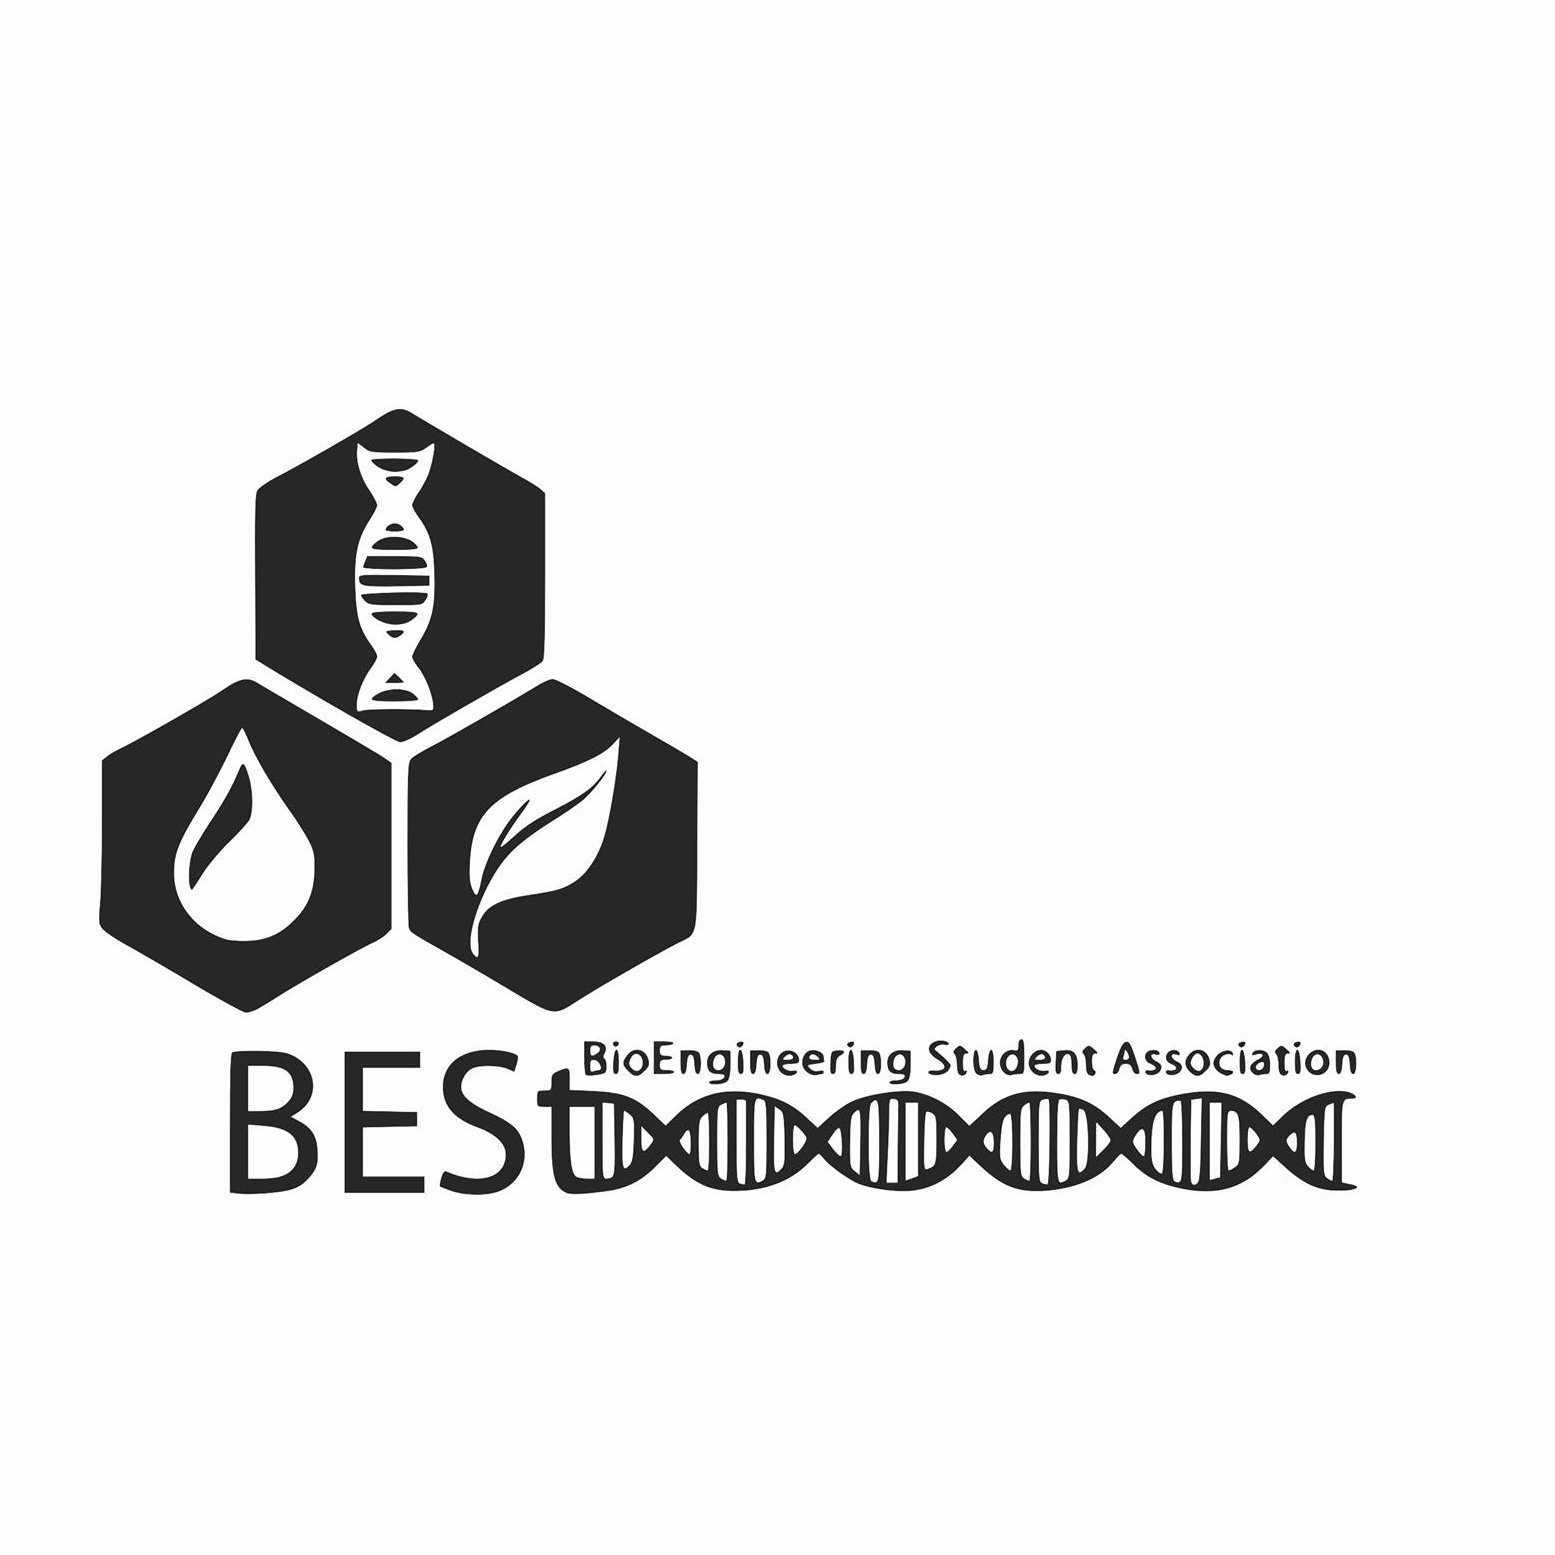 Official Twitter account for the Bioengineering Student Association (BESt), from the University of Toronto